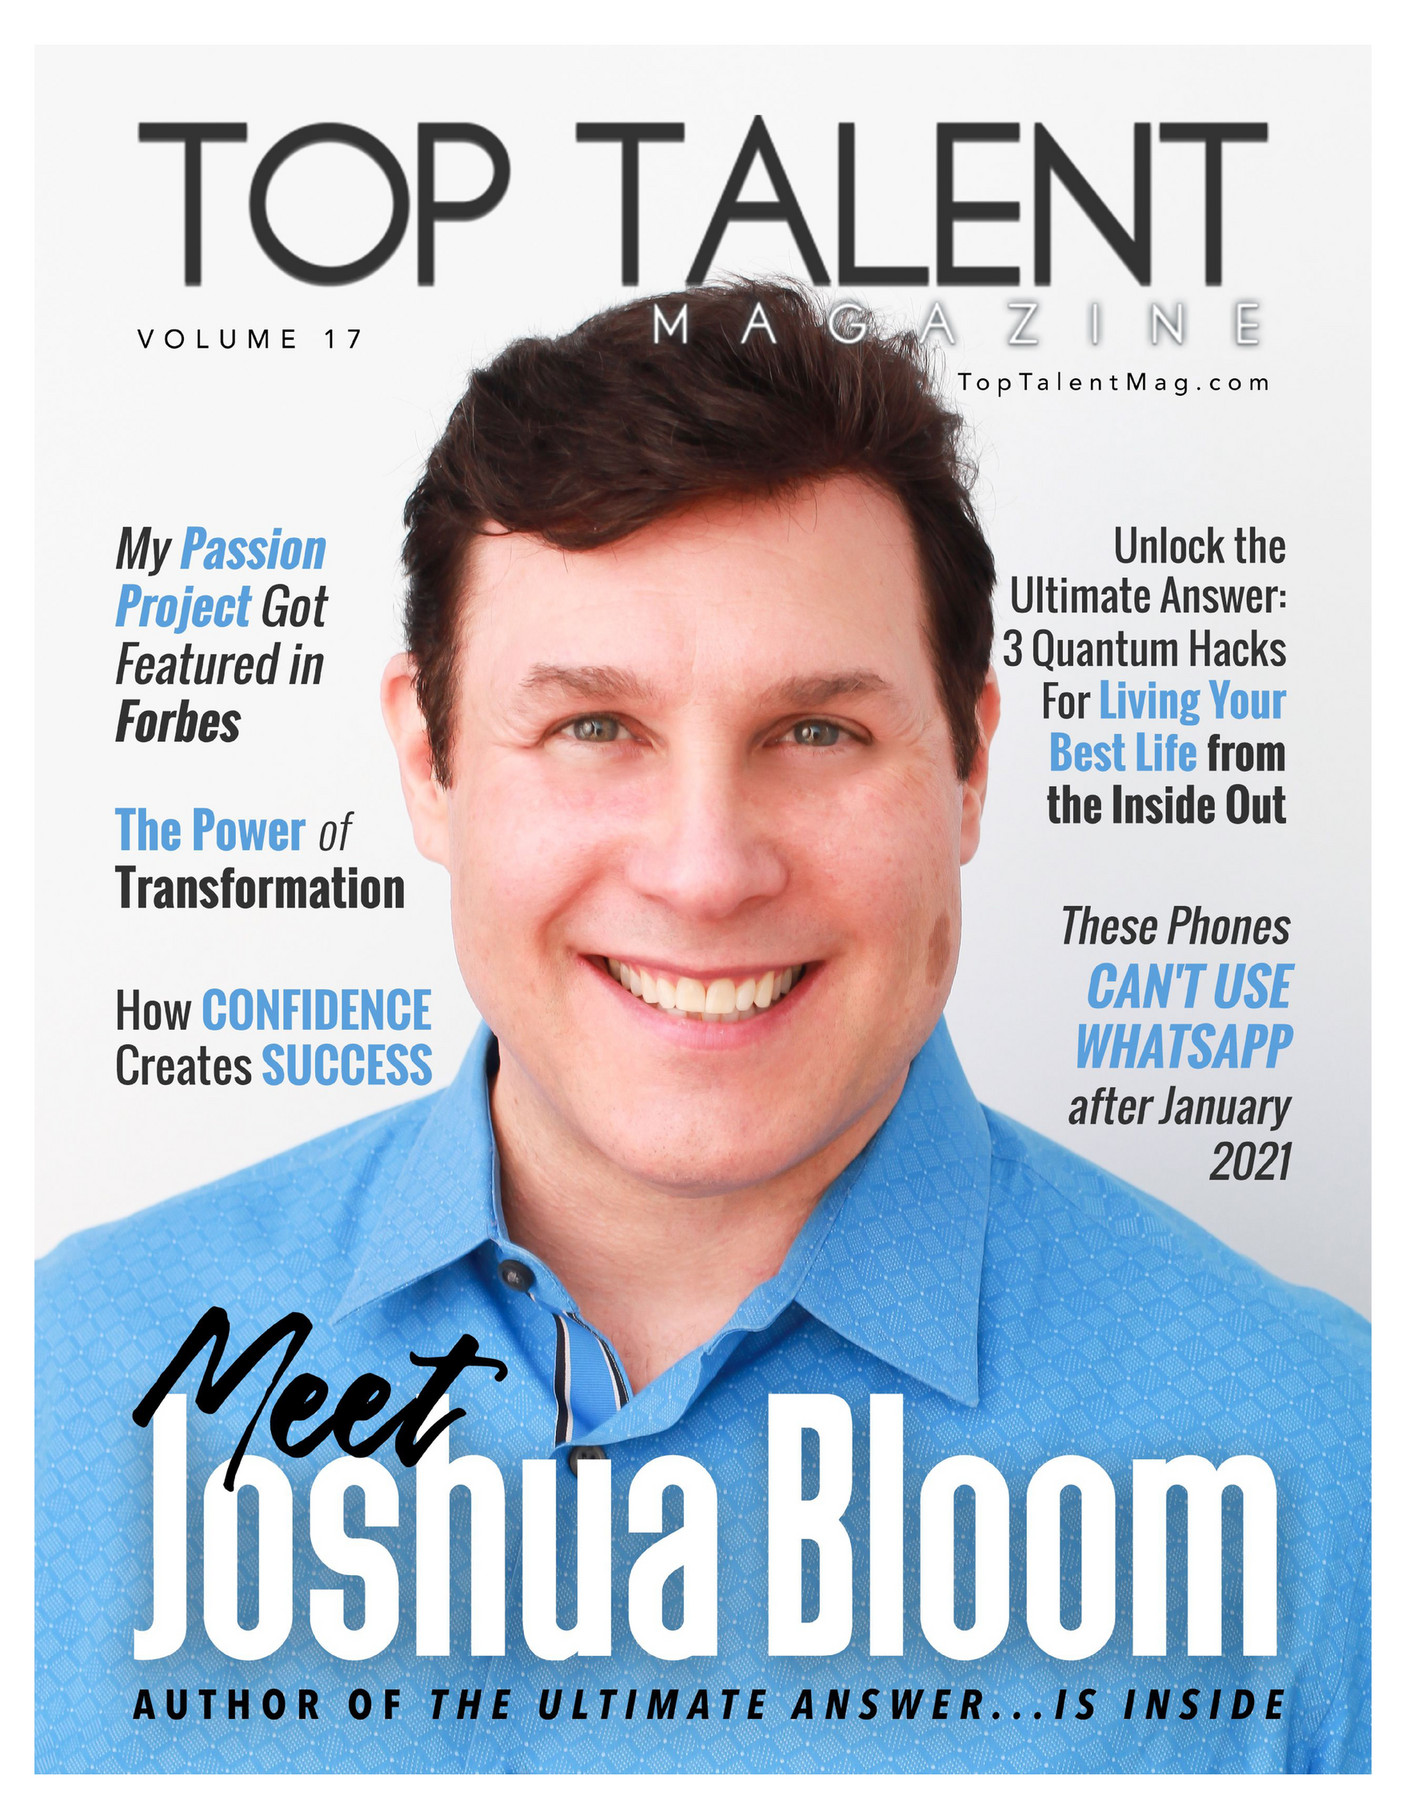 top-talent-magazine-featuring-joshua-bloom-page-2-3